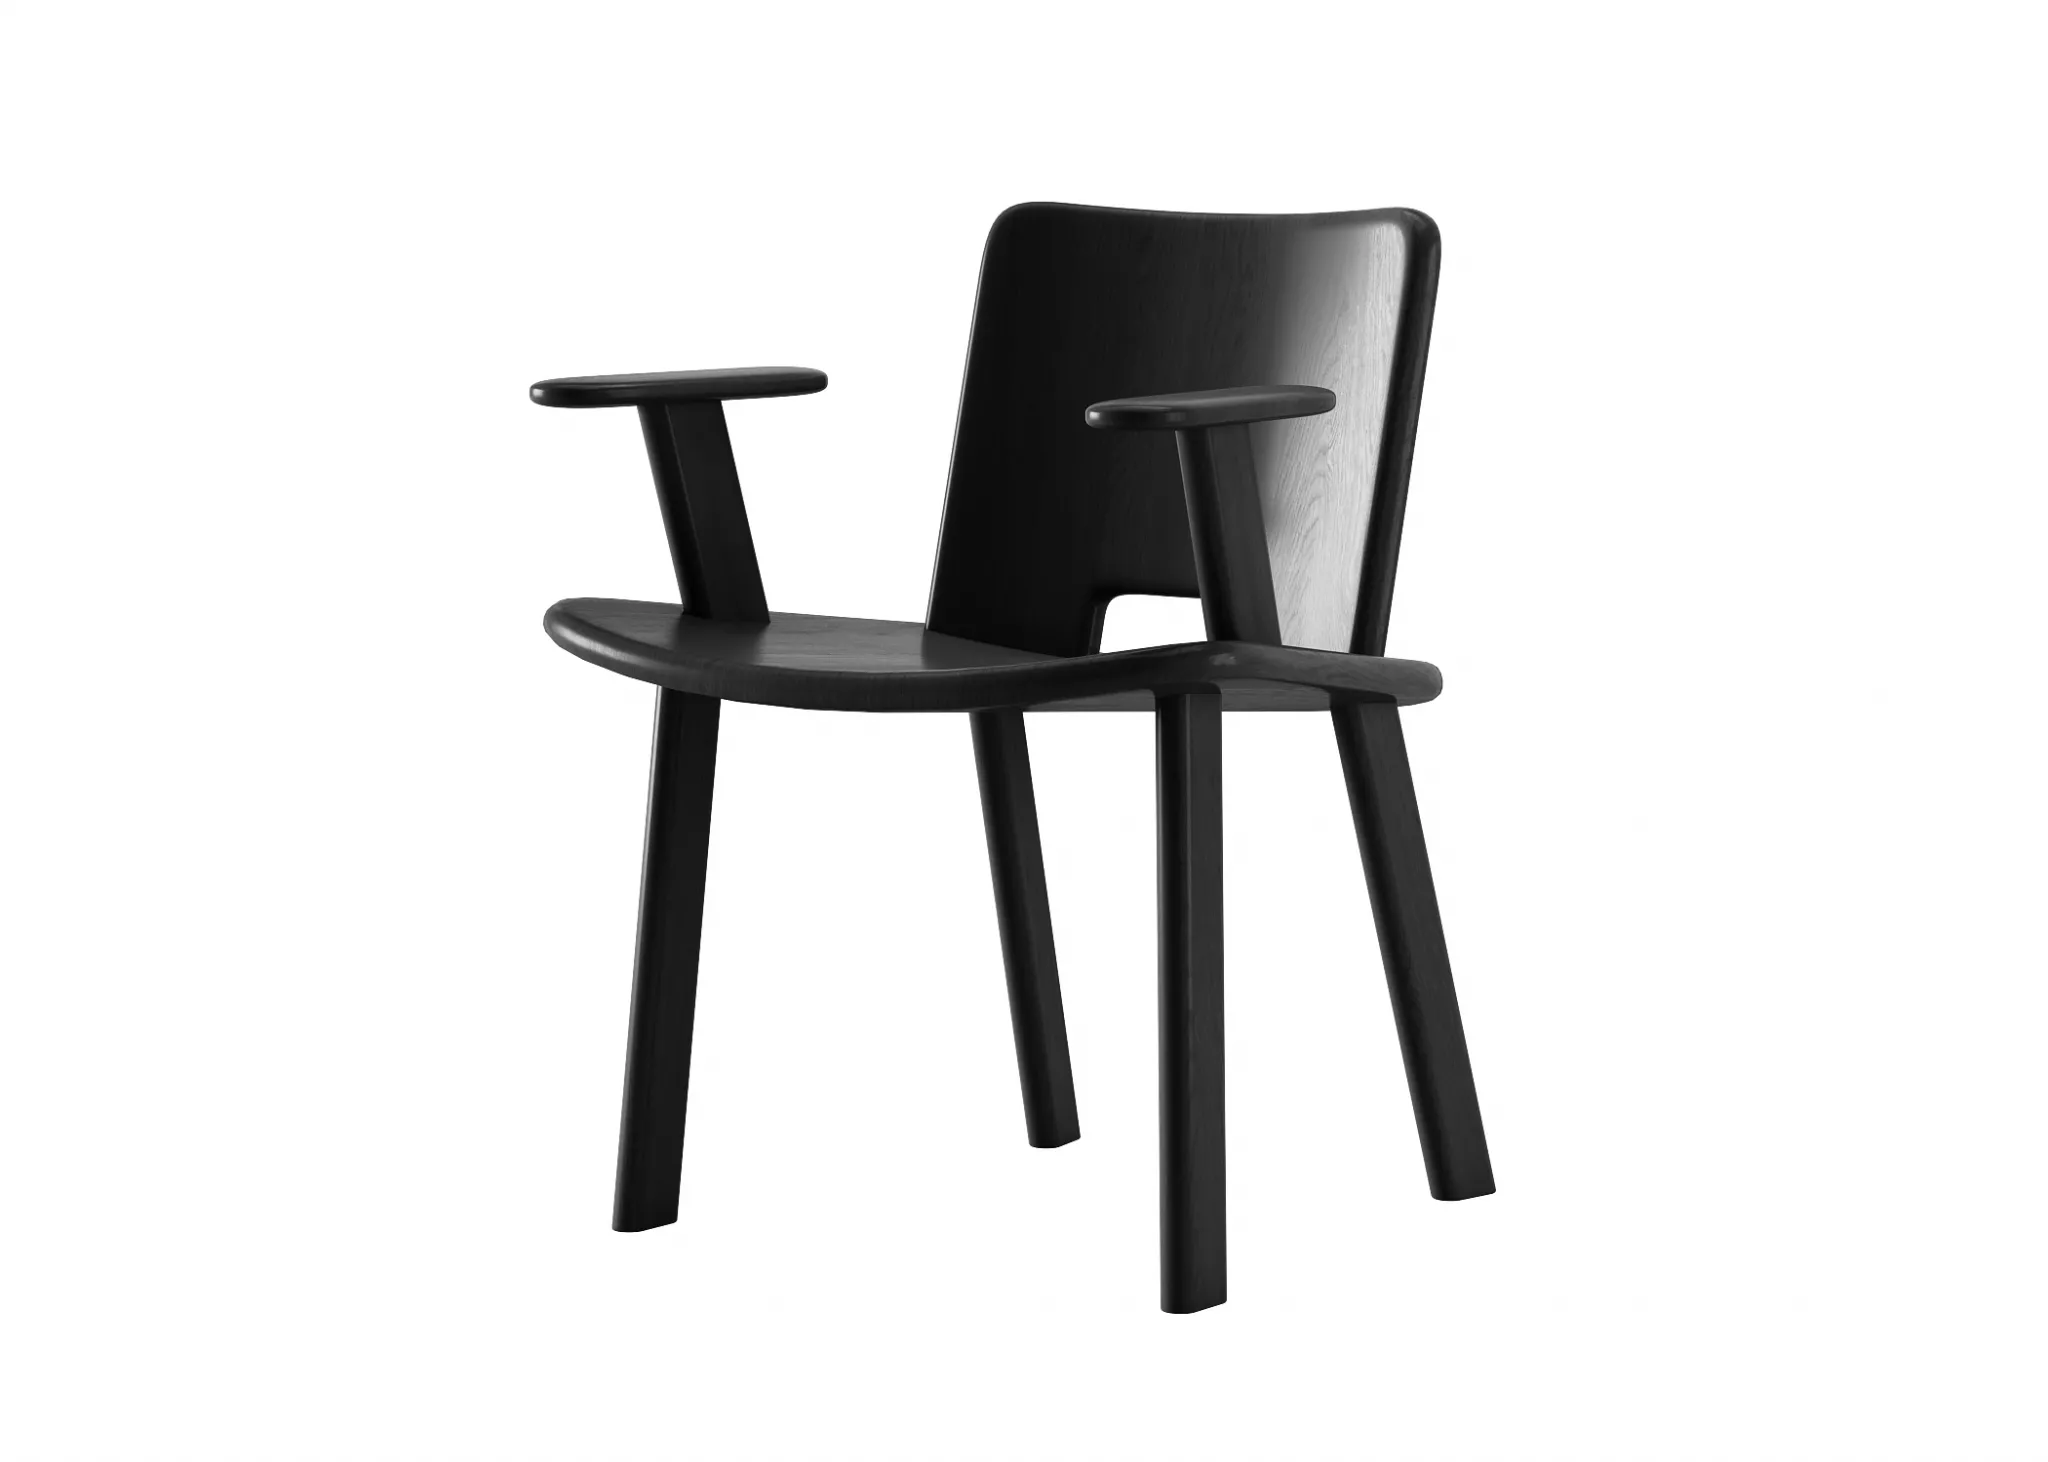 FURNITURE 3D MODELS – CHAIRS – 0314